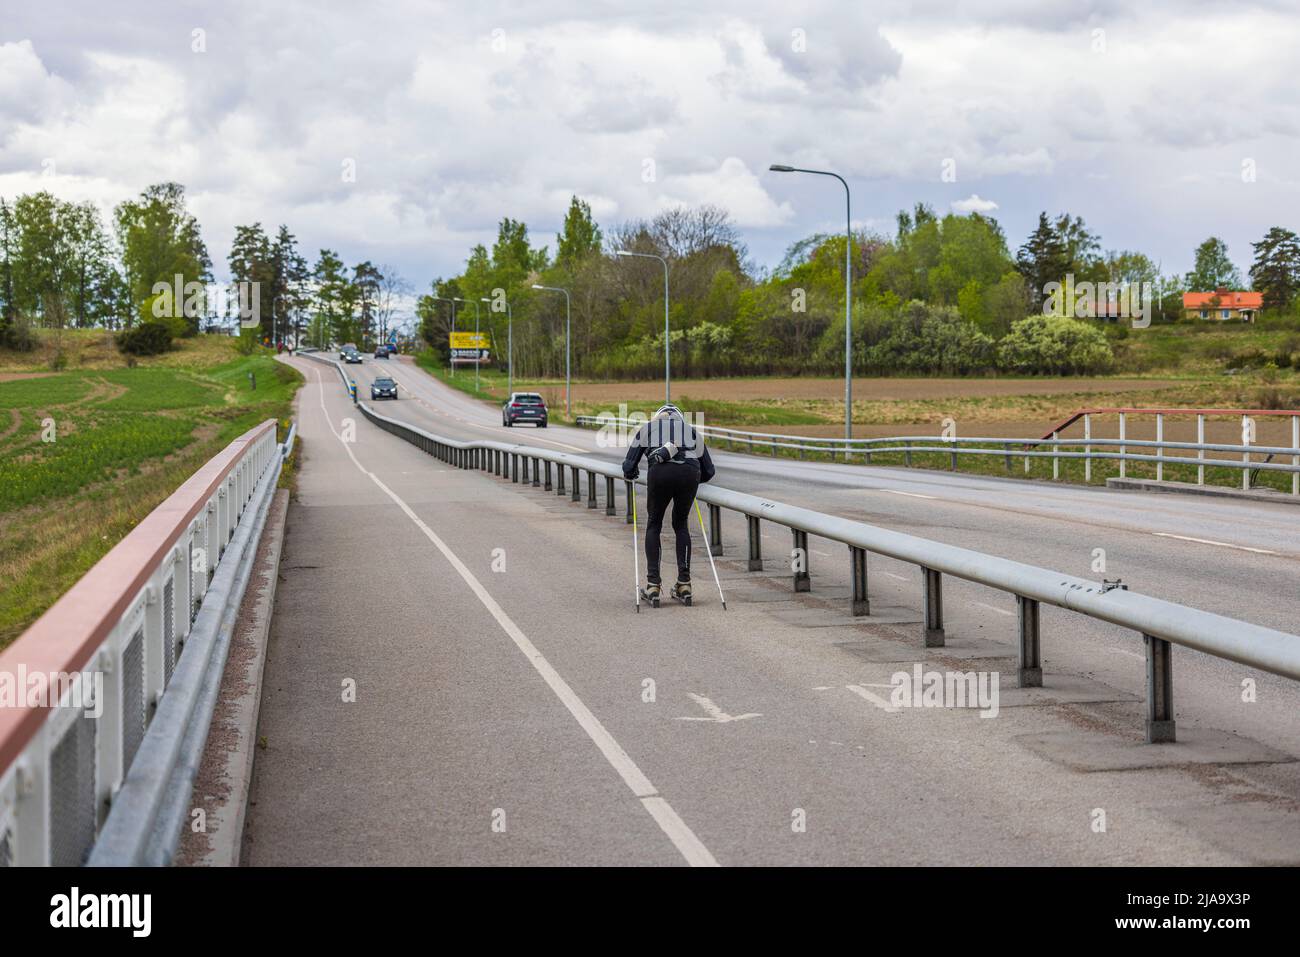 Man trains on roller skis on dedicated bike path on summer day. Sweden. Stock Photo